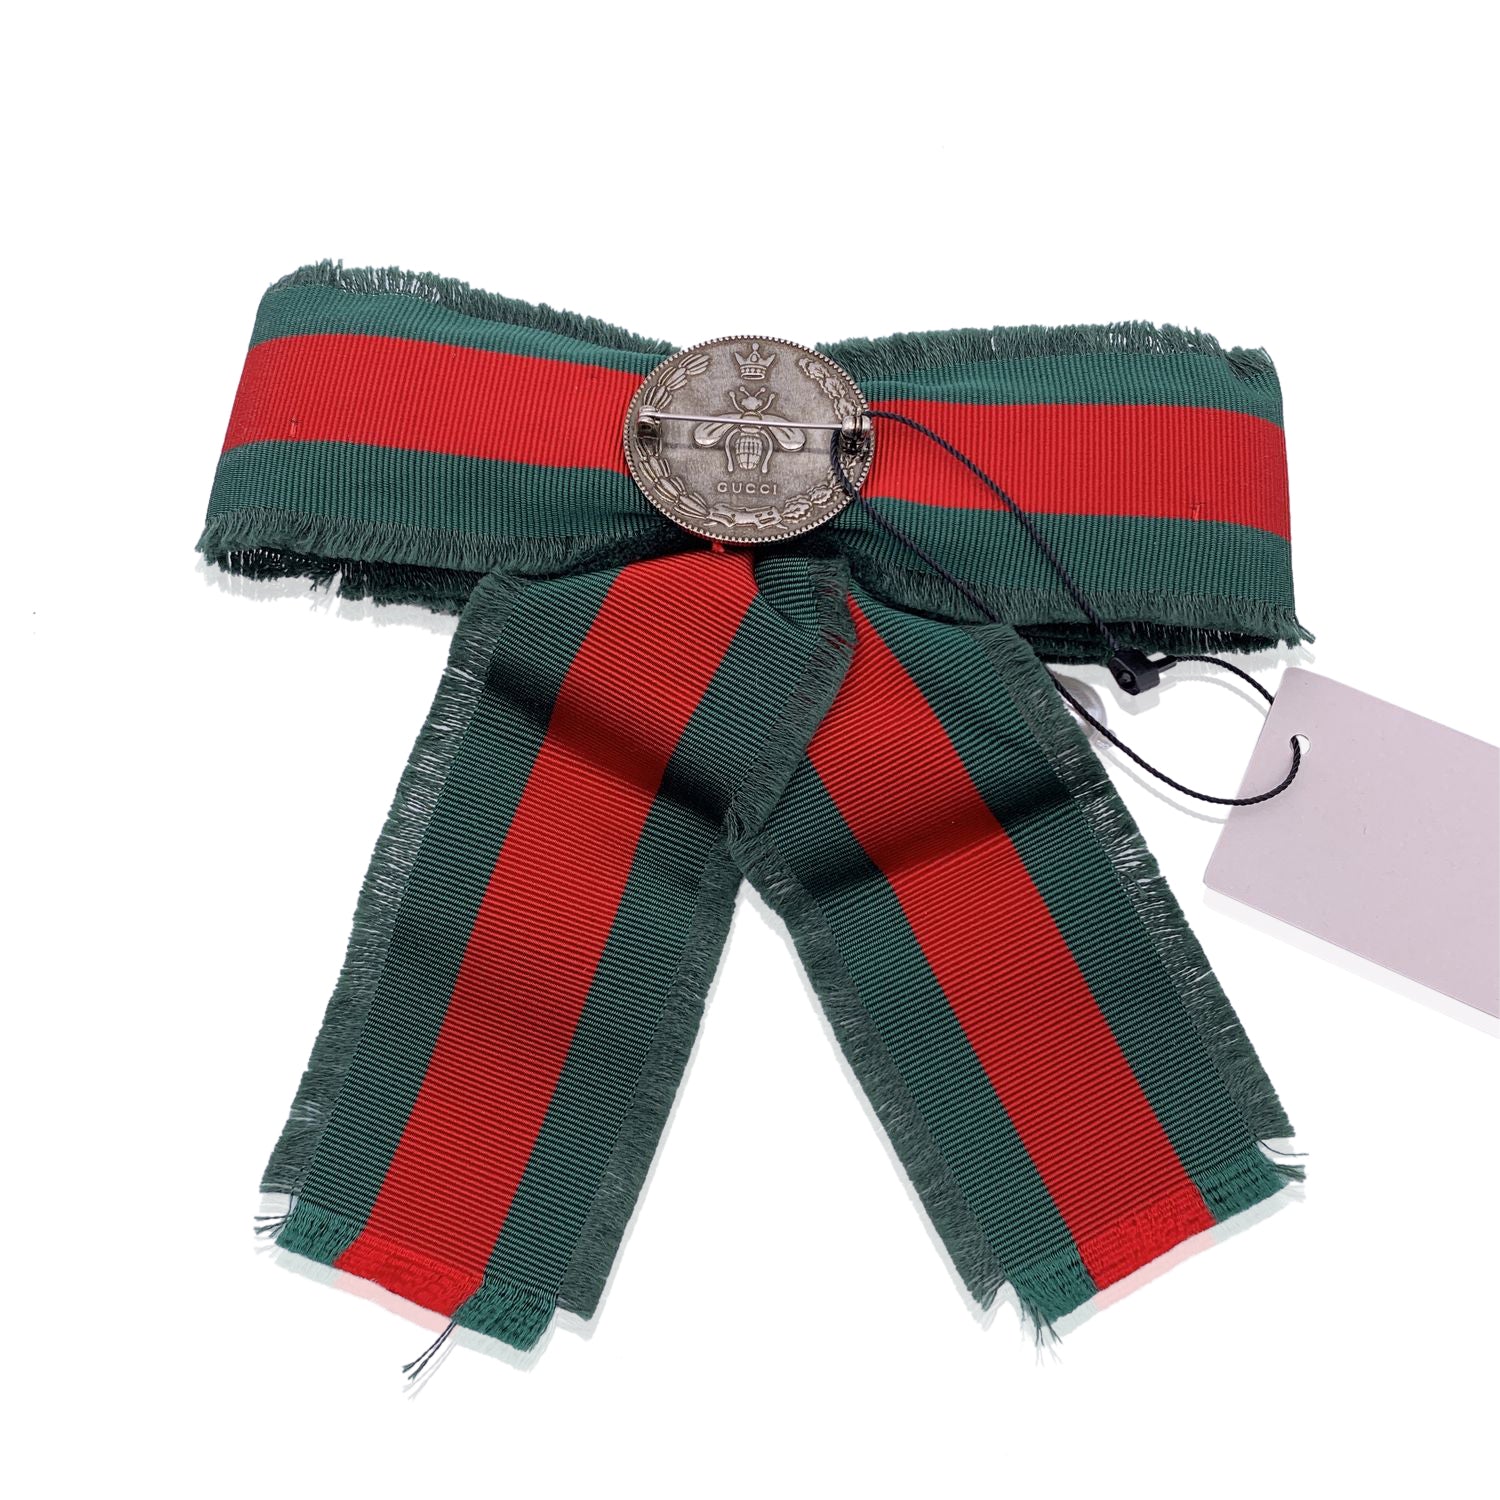 GUCCI Brooches Bow Brooch